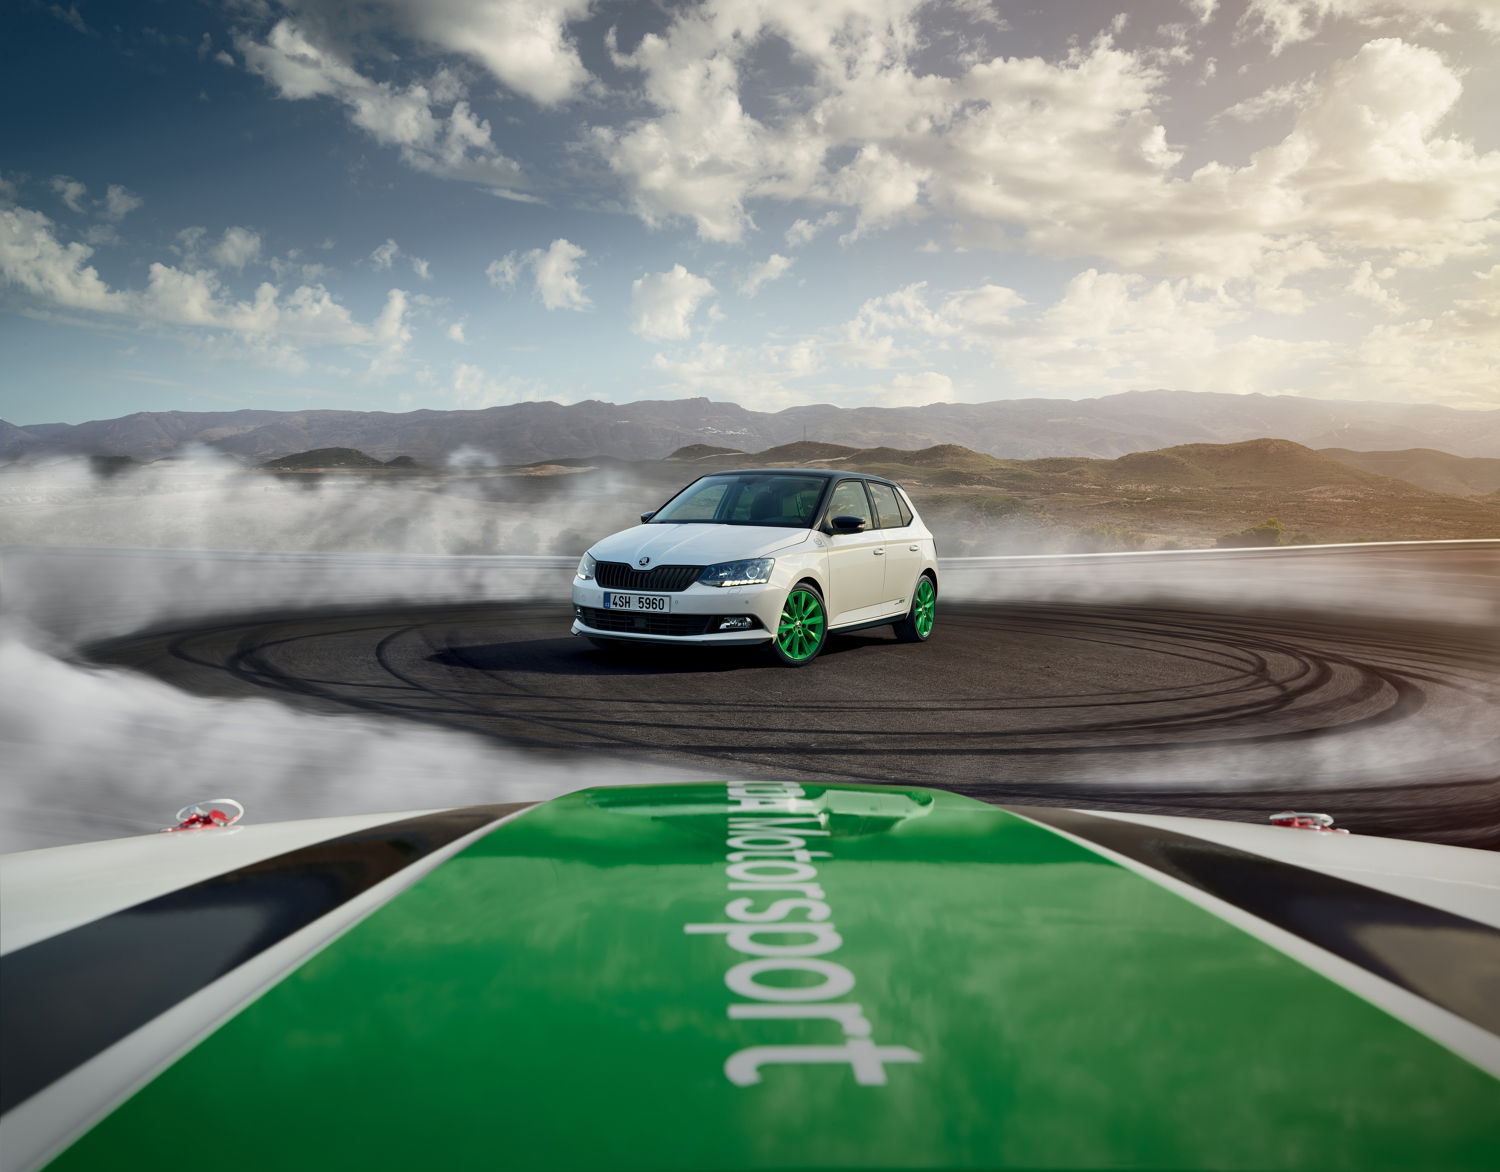 A limited number of 1,300 cars will be available in 21 selected markets. The bright green 17-inch alloy wheels is a reference to the ŠKODA FABIA R5, the most successful car in its category.